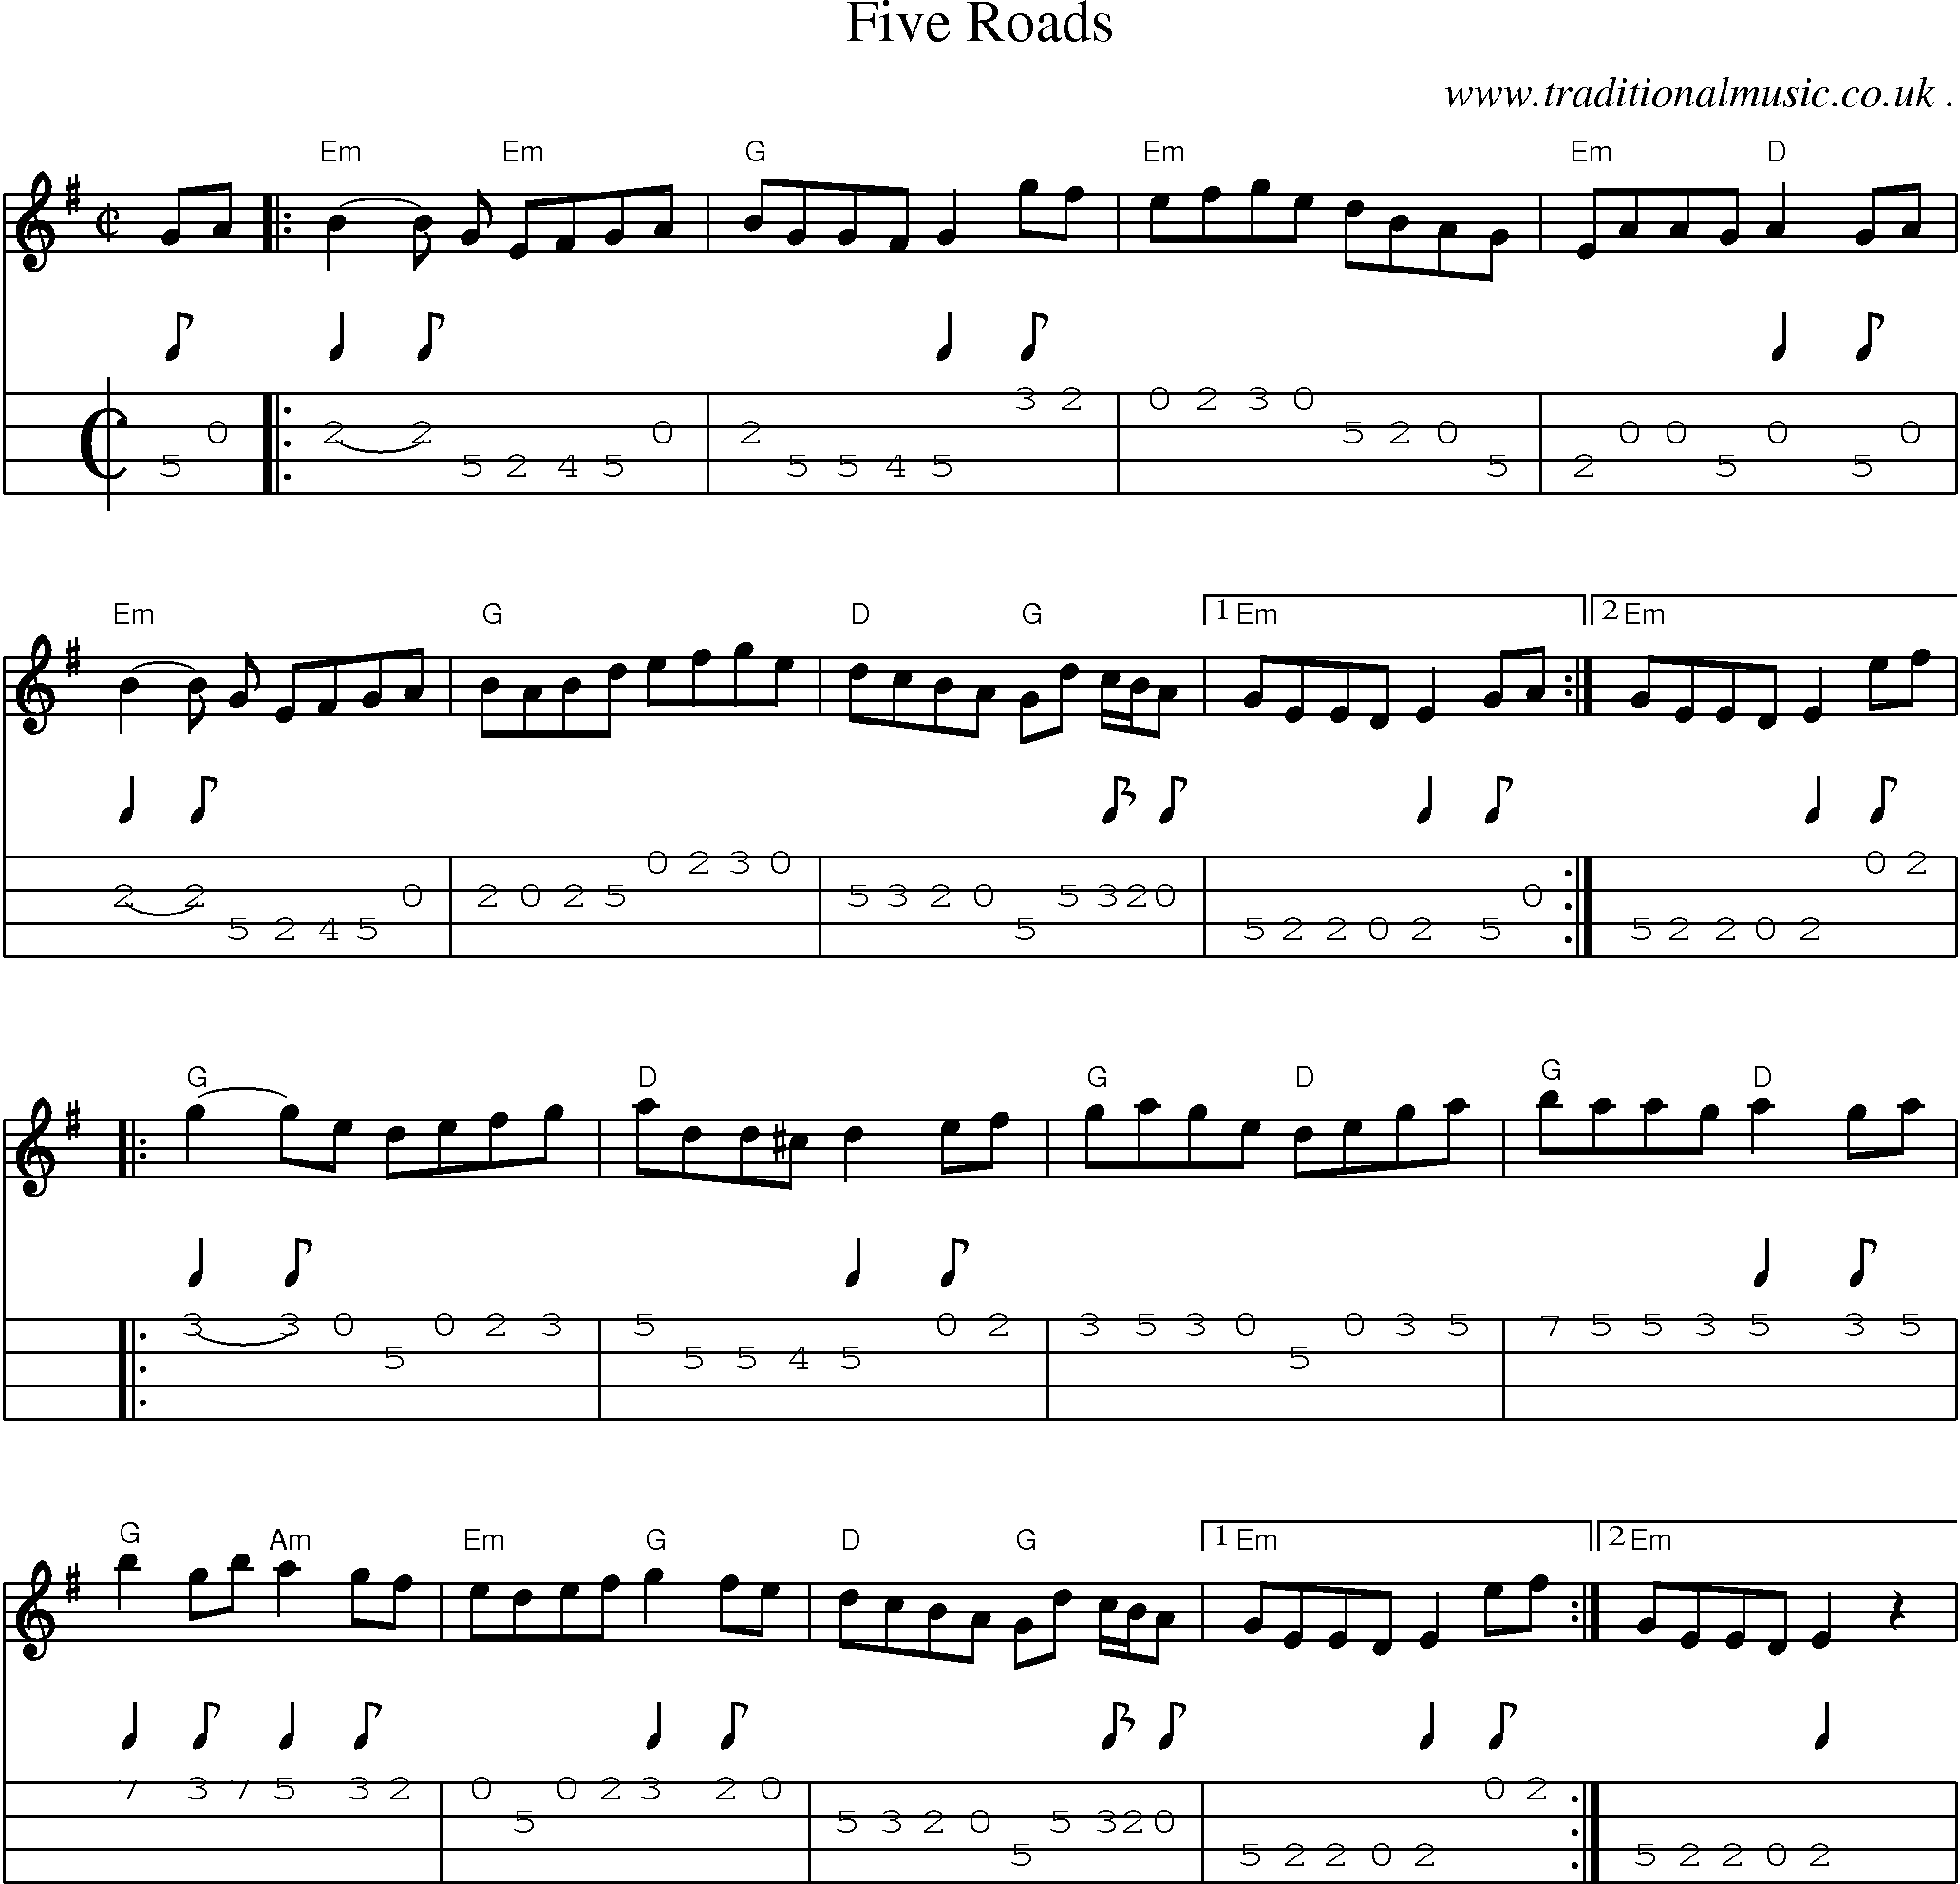 Music Score and Guitar Tabs for Five Roads